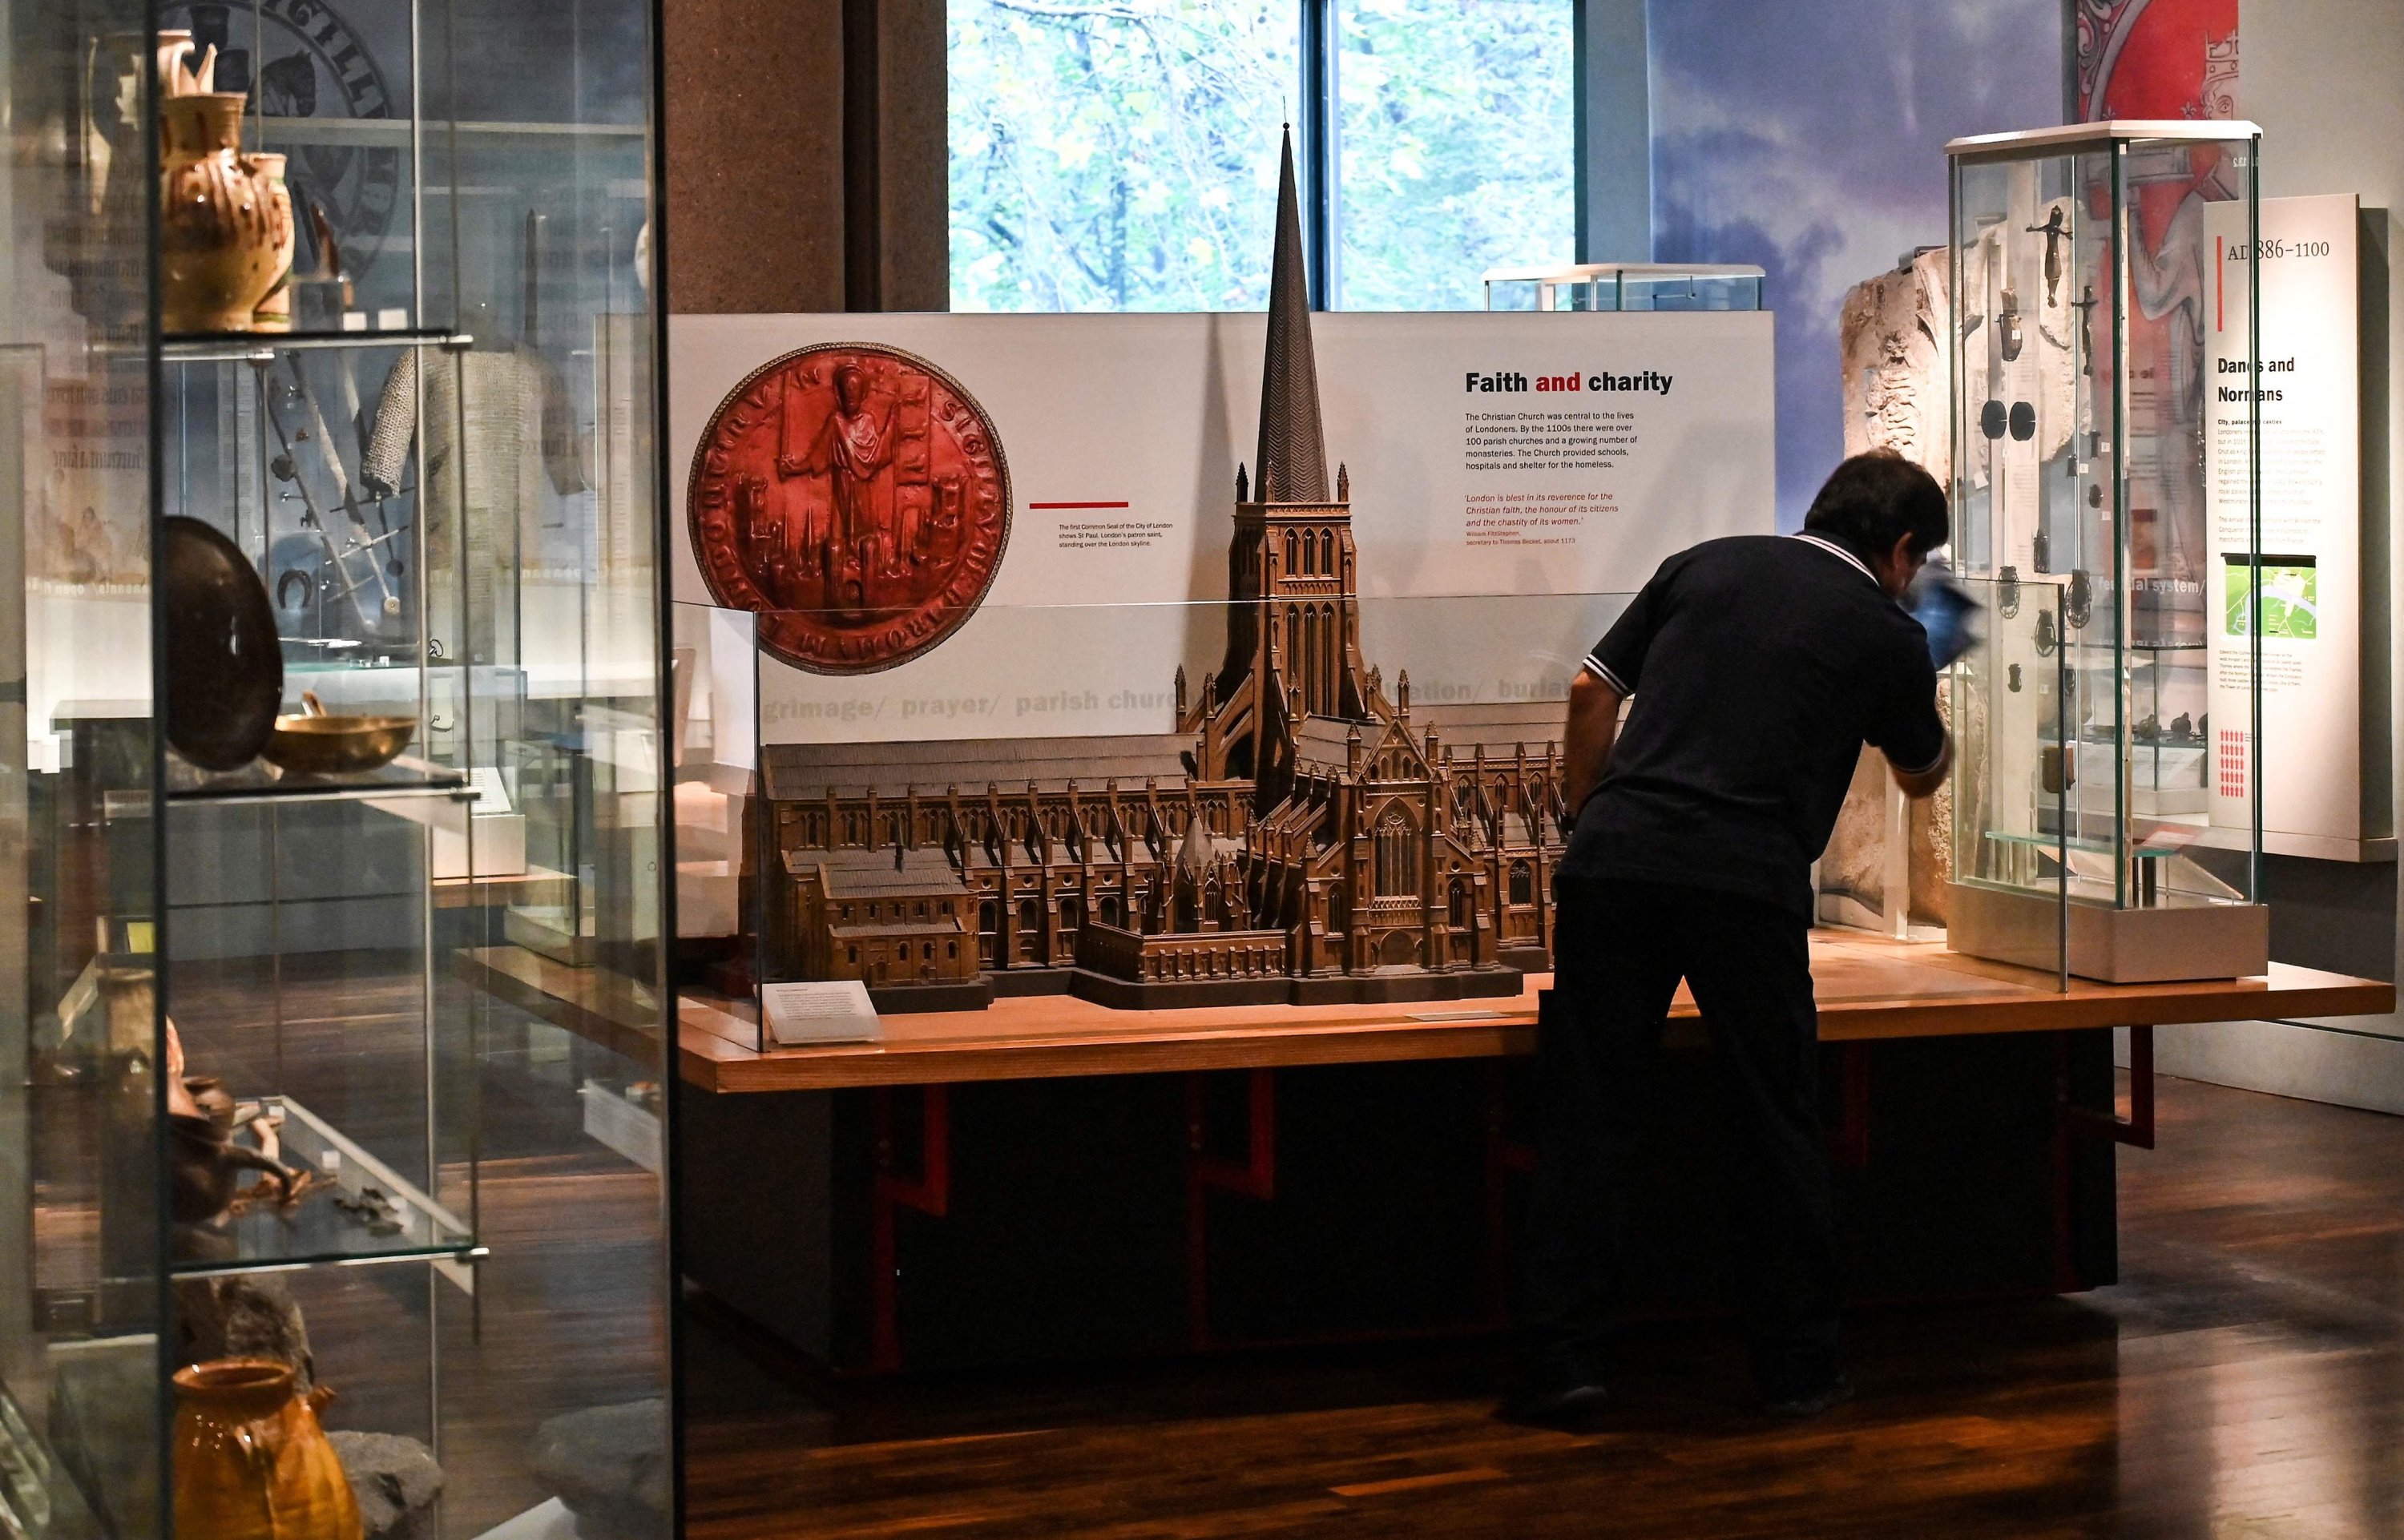 A cleaner wipes down a glass covering the miniature of a gothic church displayed at the Museum of London, London, U.K., Nov. 8 2022. (AFP Photo)